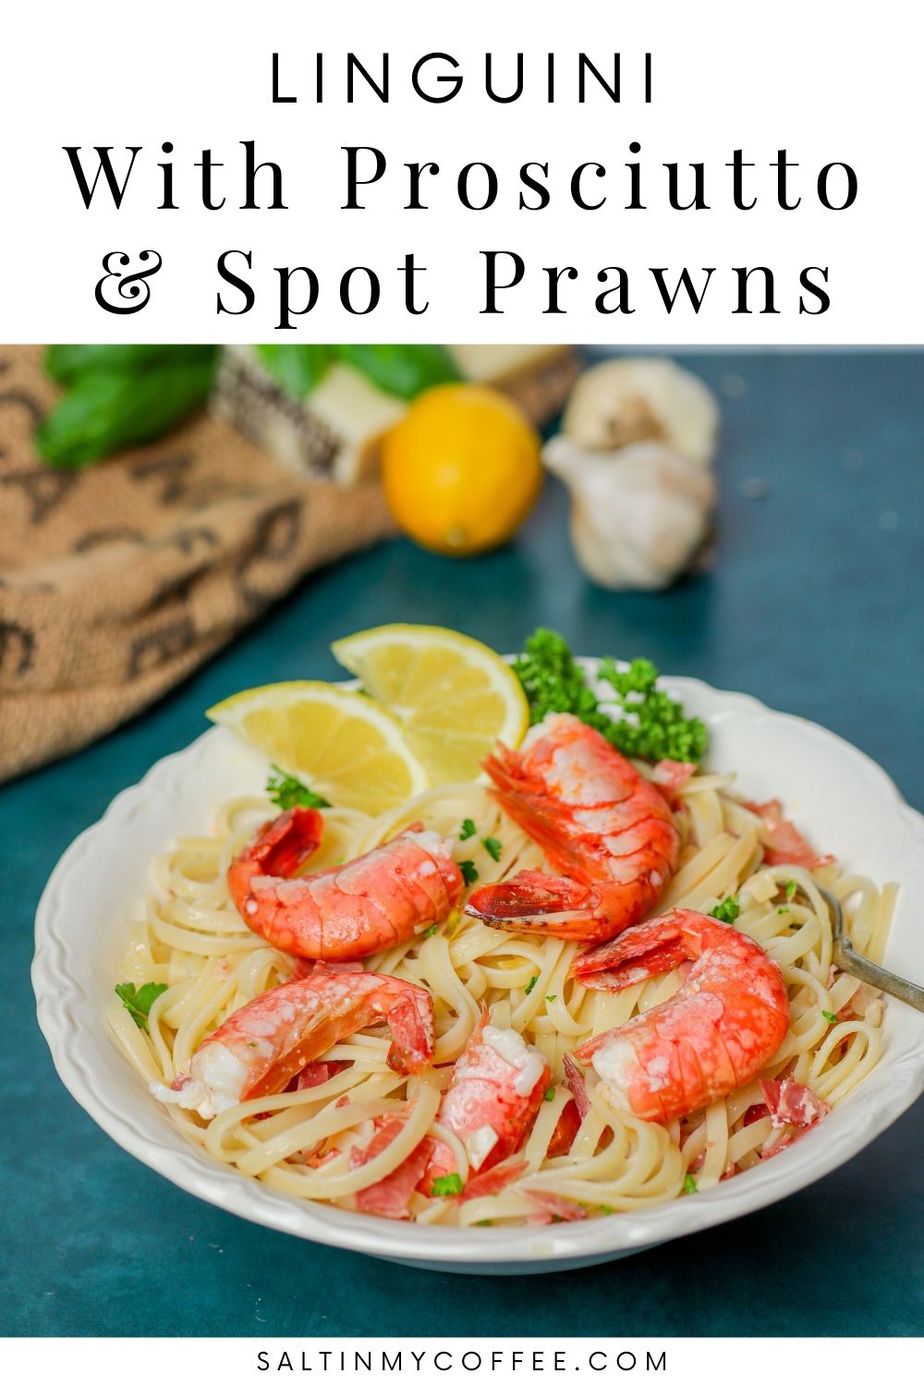 Linguini with Prosciutto and Spot Prawns - Salt in my Coffee